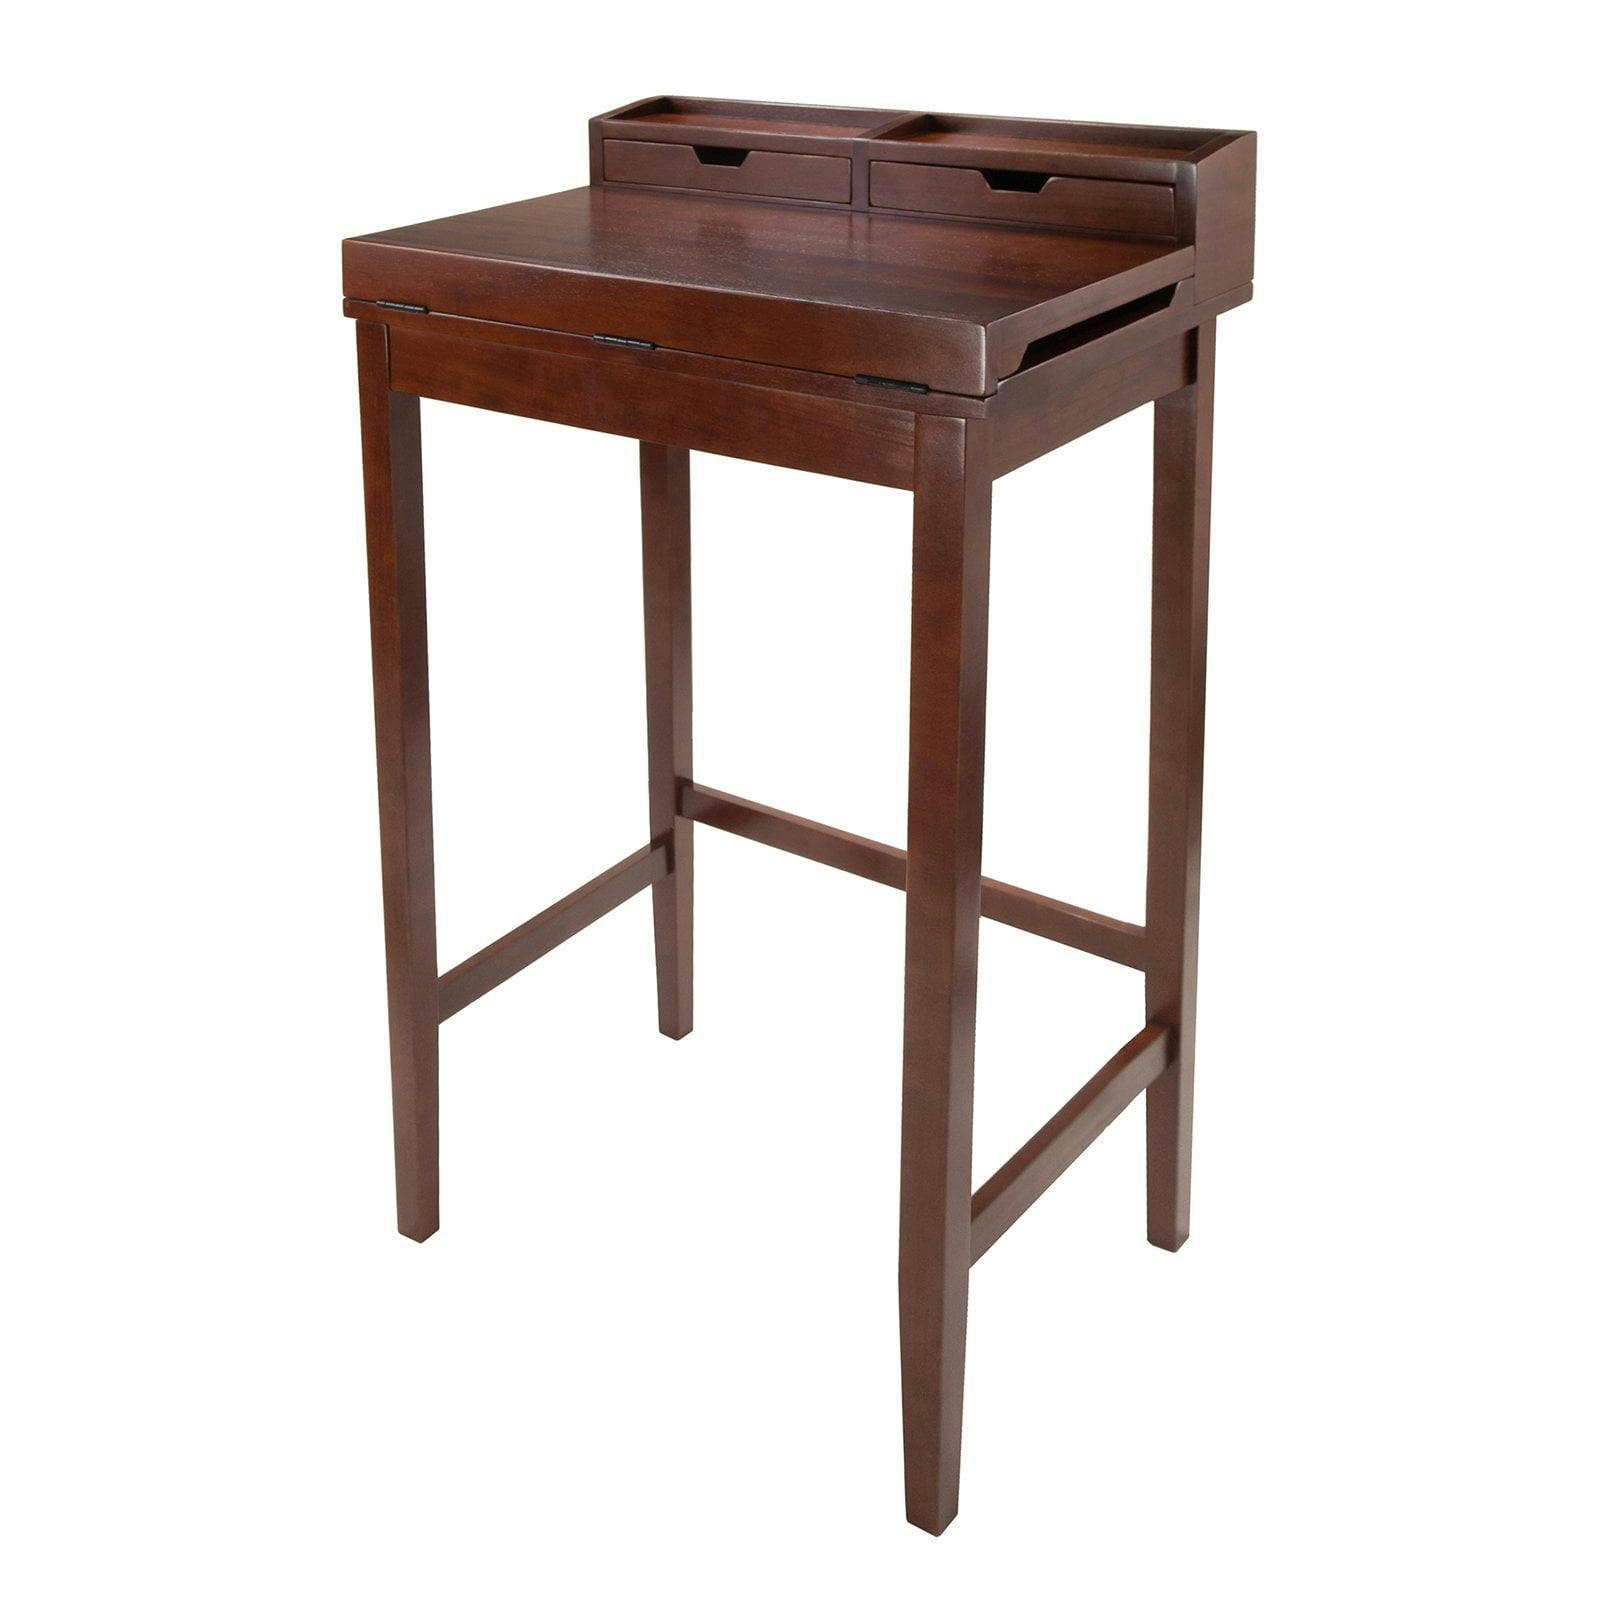 Transitional Walnut High Desk with Foldable Top and Drawers